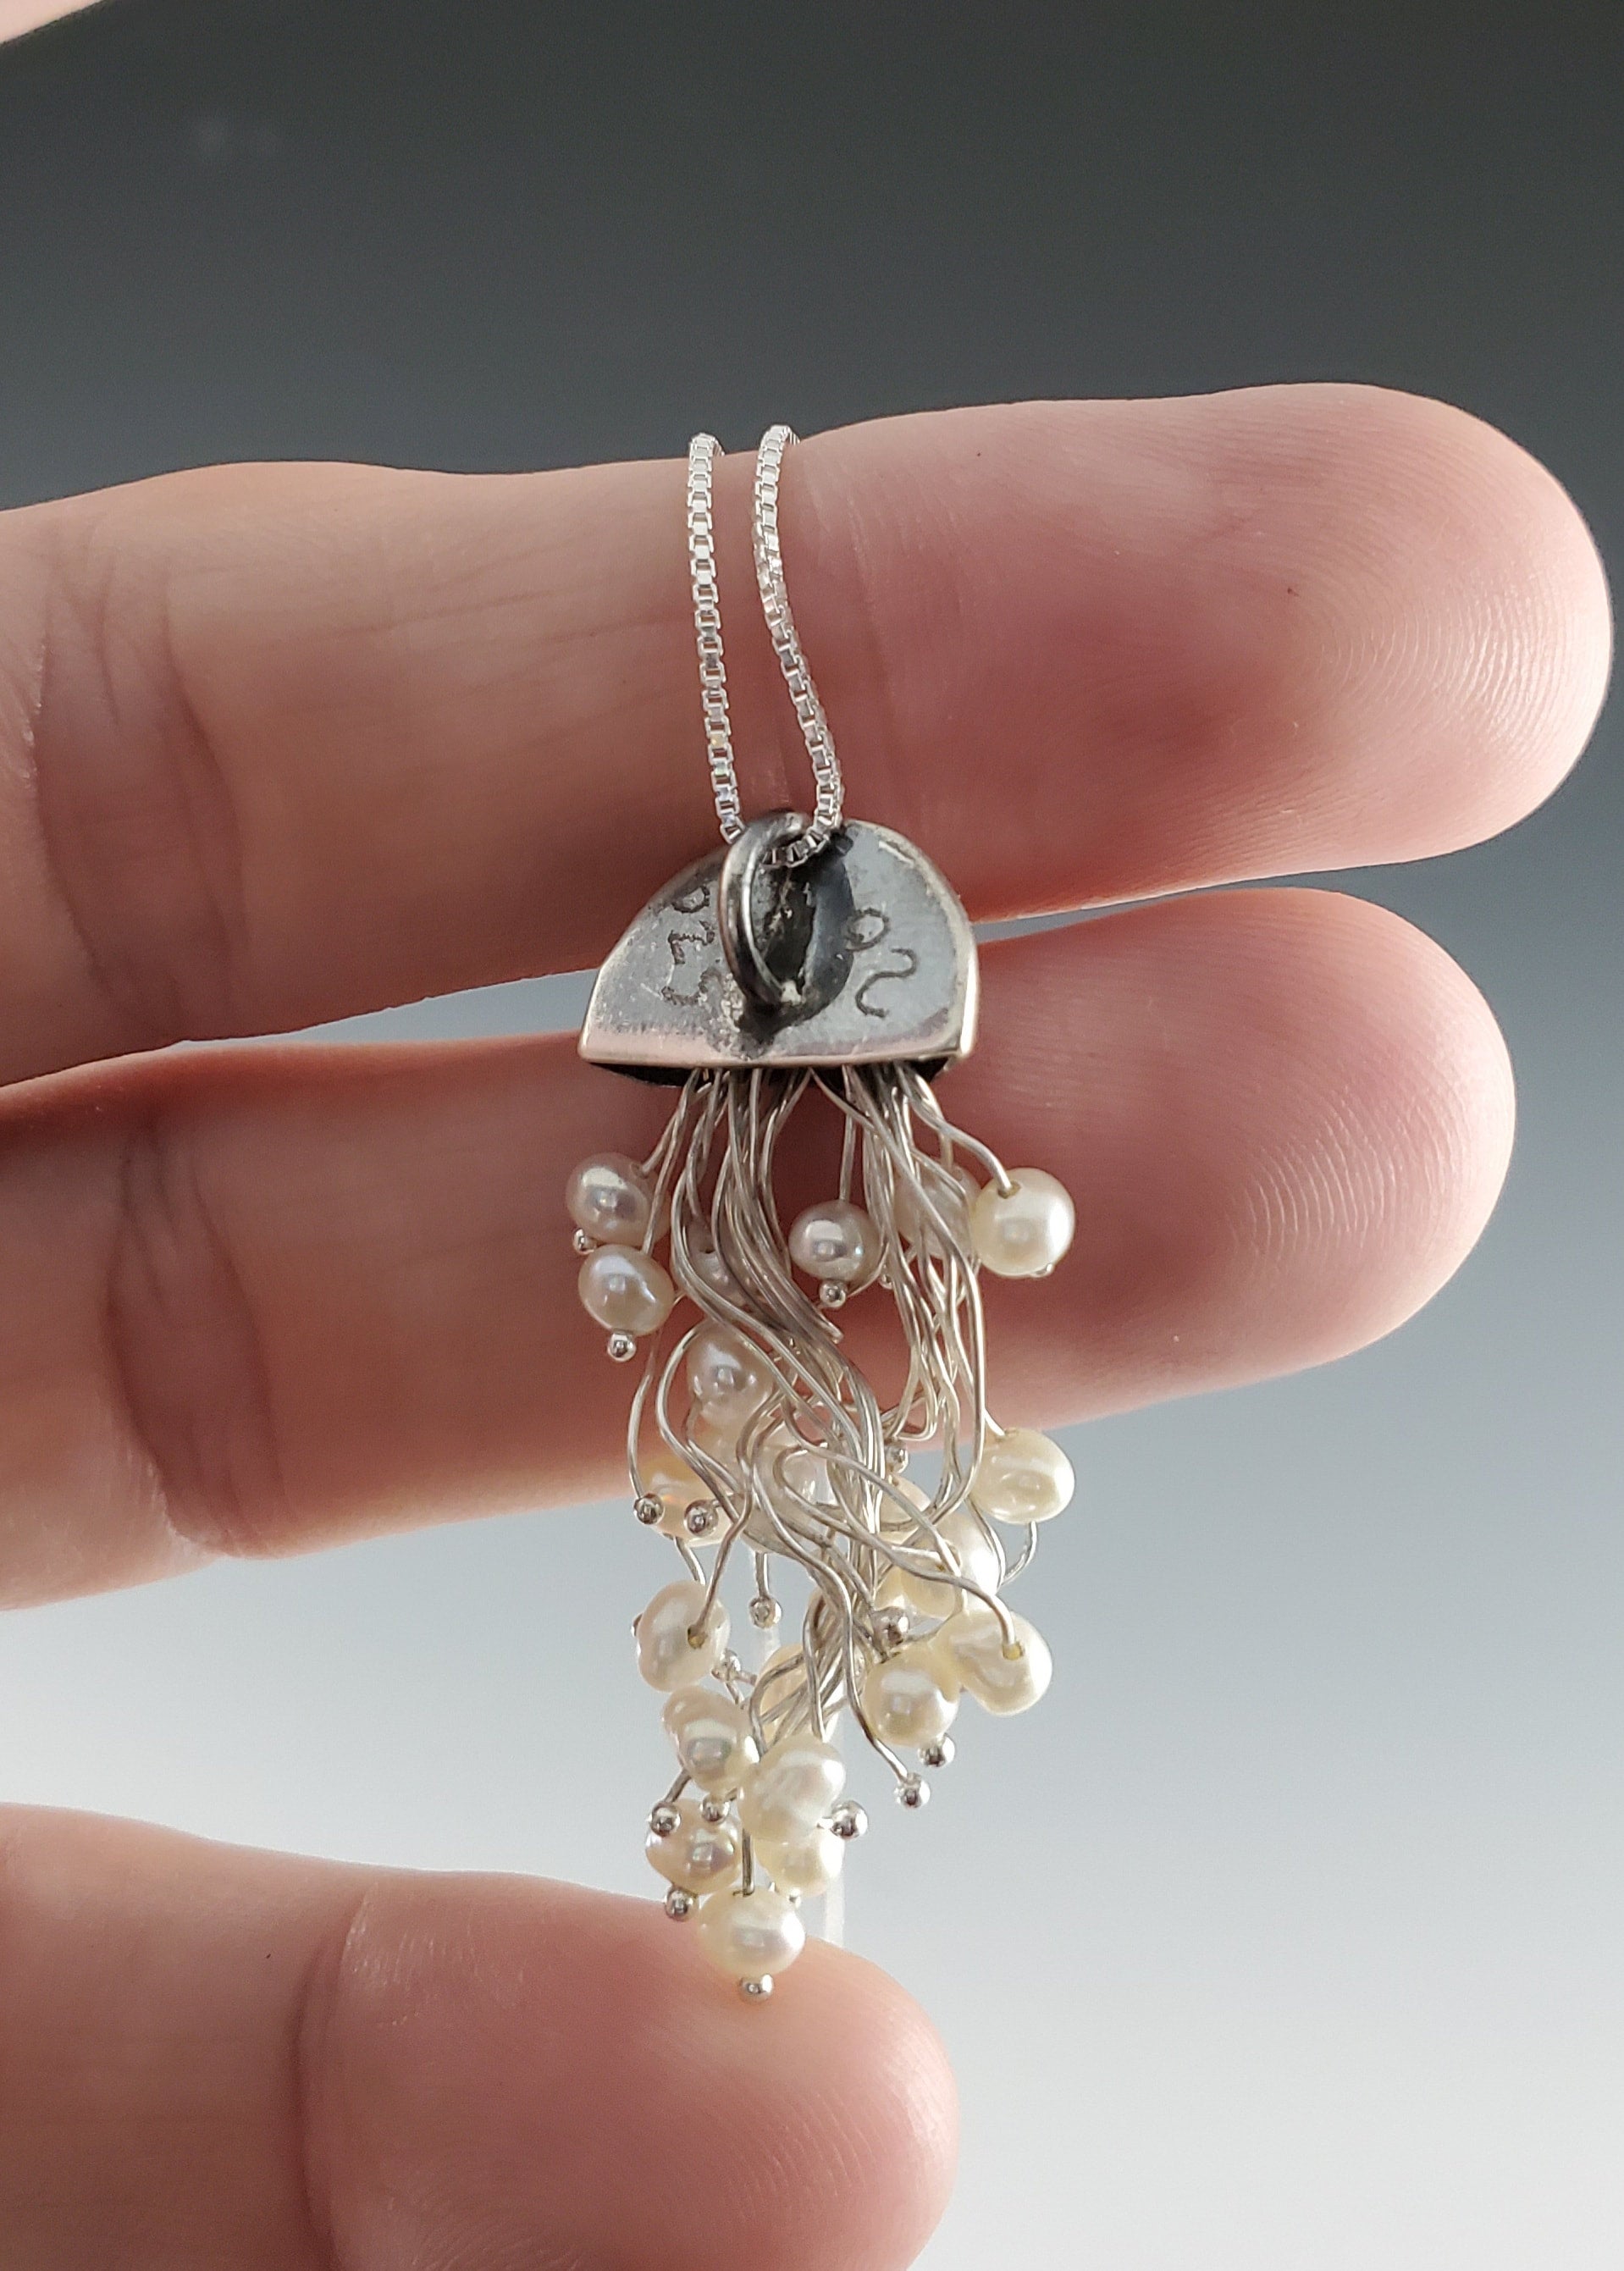 jellyfish pendant, sterling silver with pearls